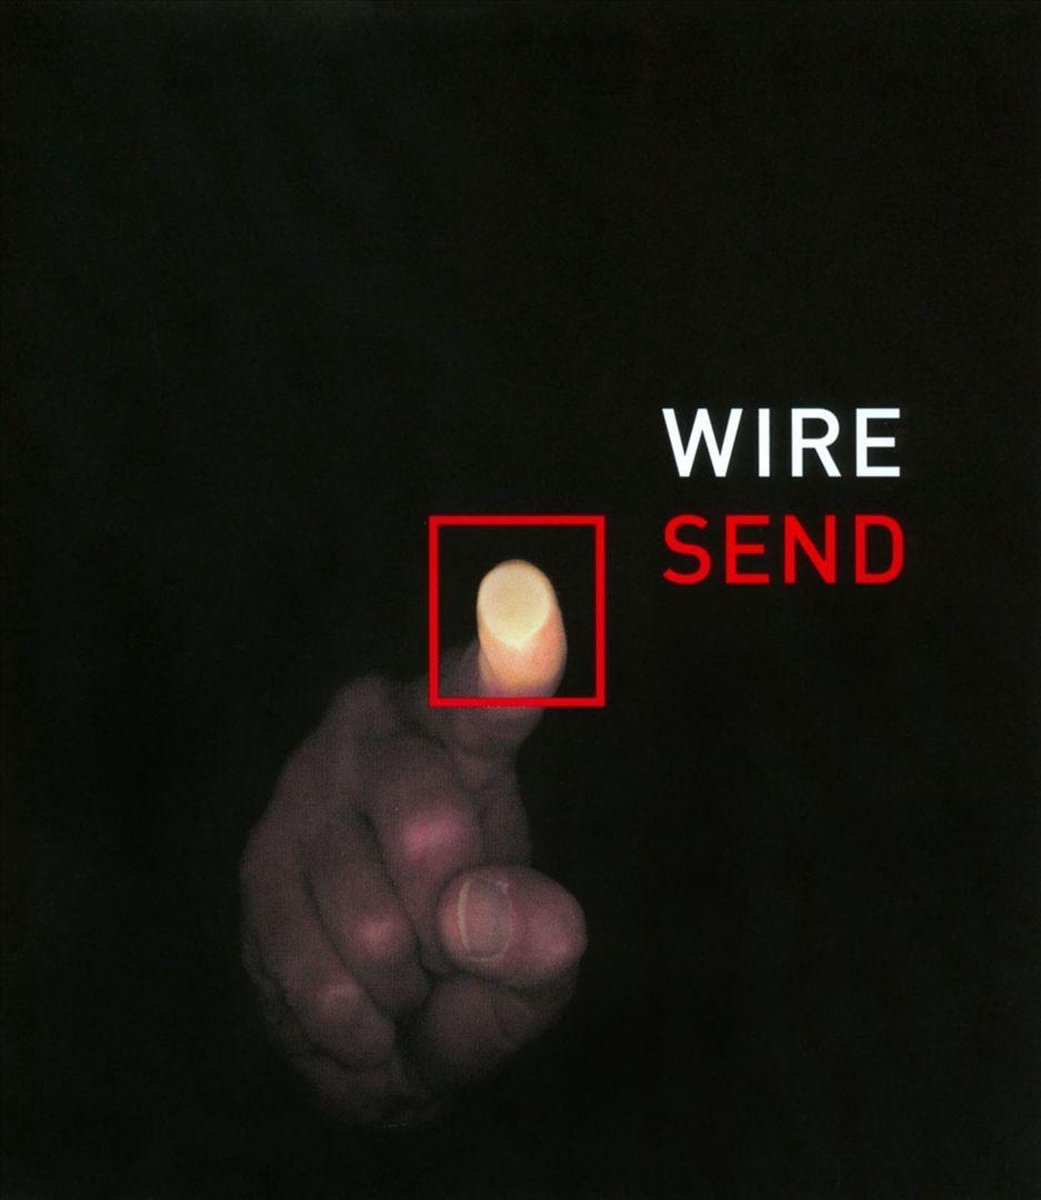 NEWS On this day, 19 ago, Wire returned after a hiatus of a decade with their 10th studio album, Send!